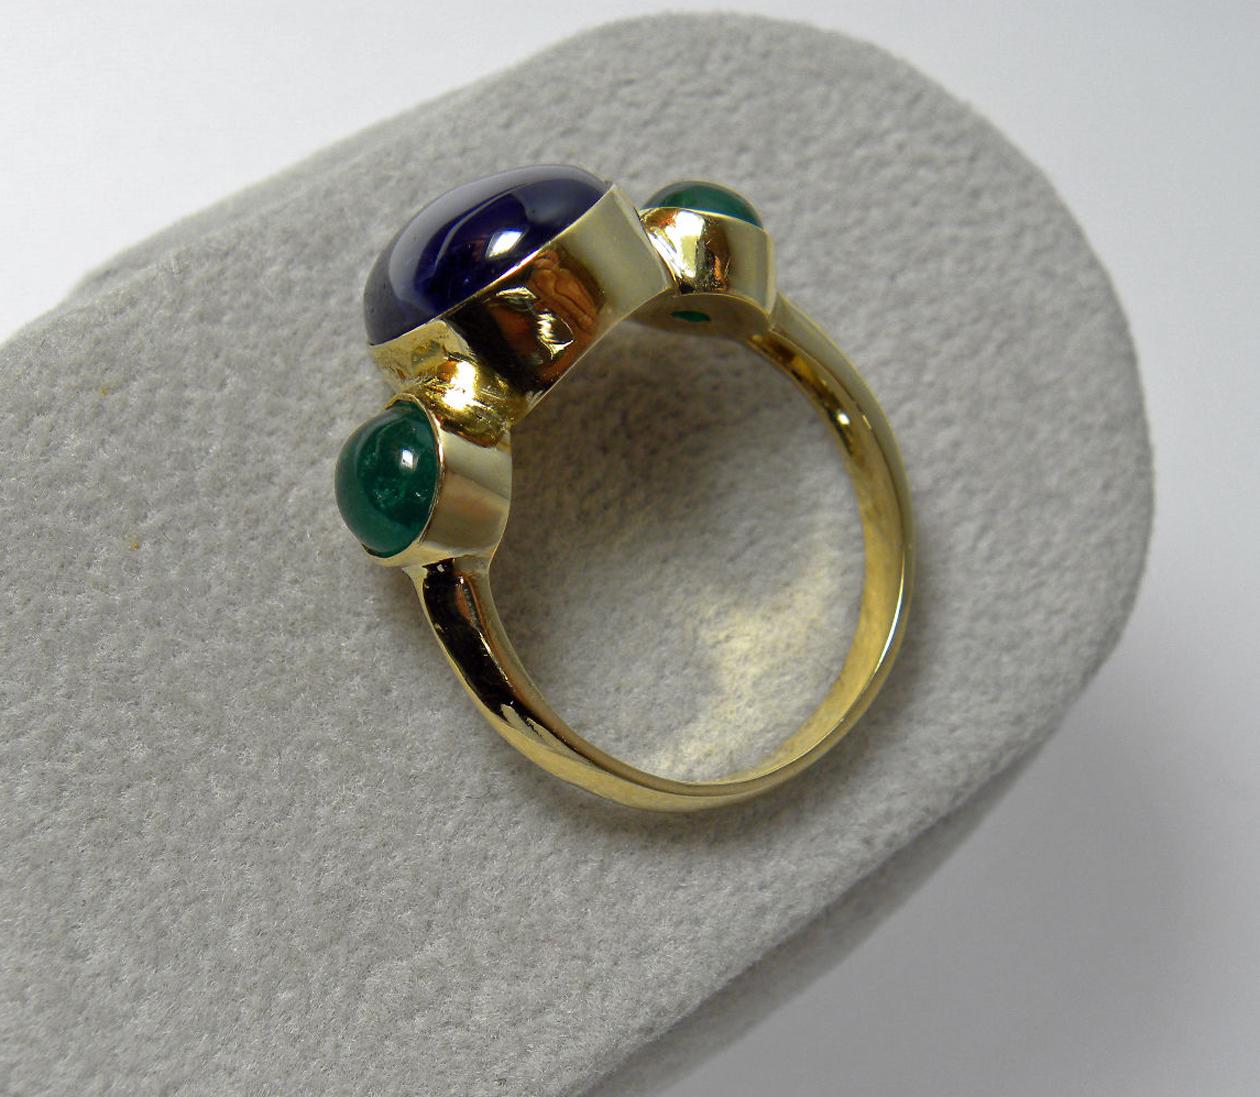 12.99 Carat Natural Untreated Sapphire & Emerald Three Stone Cocktail Ring 18k Yellow Gold
Composition: Solid  Rich Yellow Gold 18K
Primary Stone:100% Natural Sapphire Cabochon
Sapphire Weight: 10.99 Carats (1 gem) 
Treatment : None
Average Color